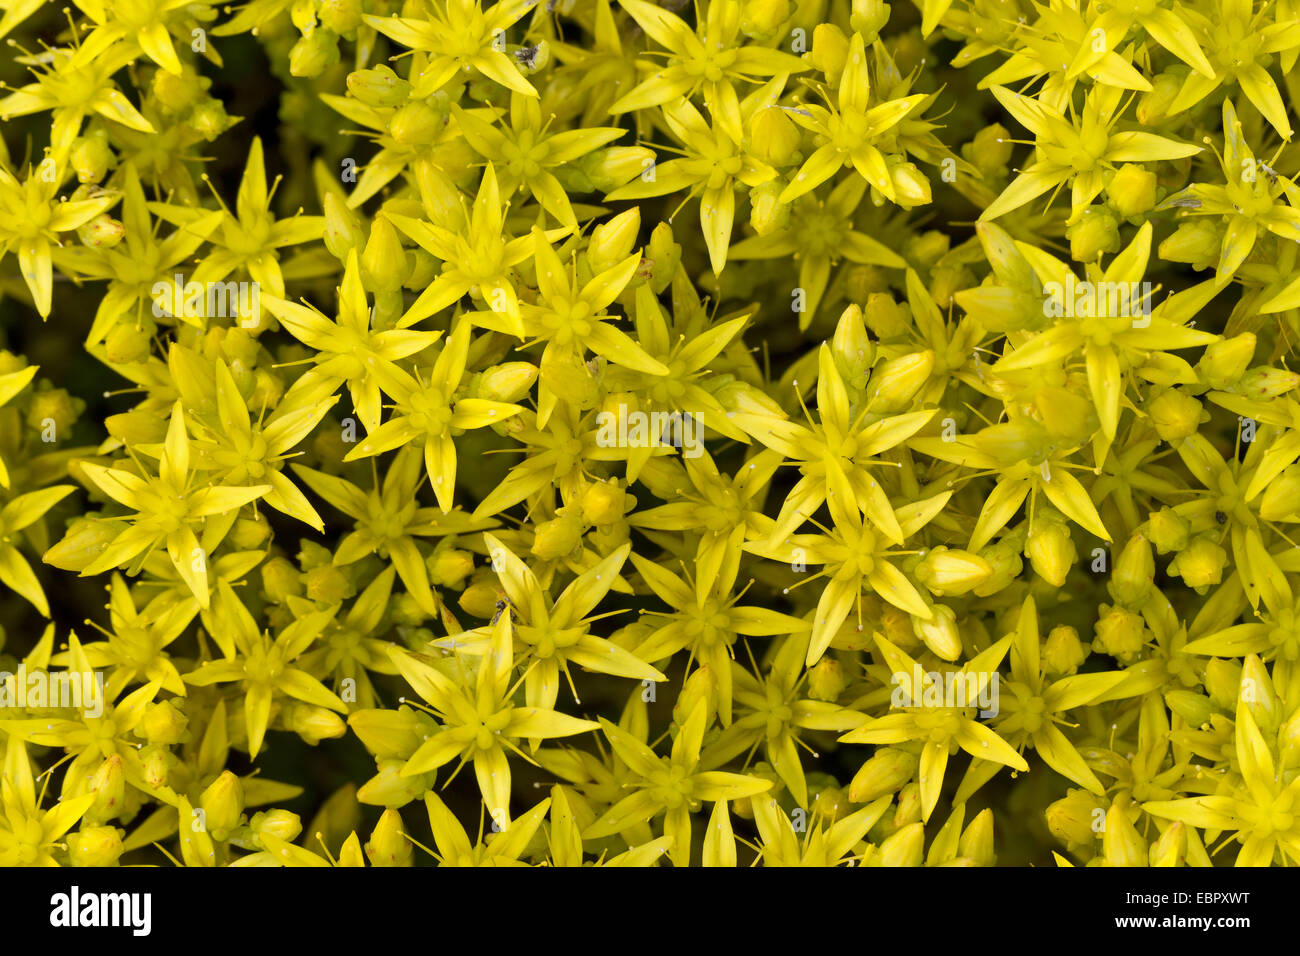 common stonecrop, biting stonecrop, mossy stonecrop, wall-pepper, gold-moss (Sedum acre), blooming, Germany, Schleswig-Holstein Stock Photo